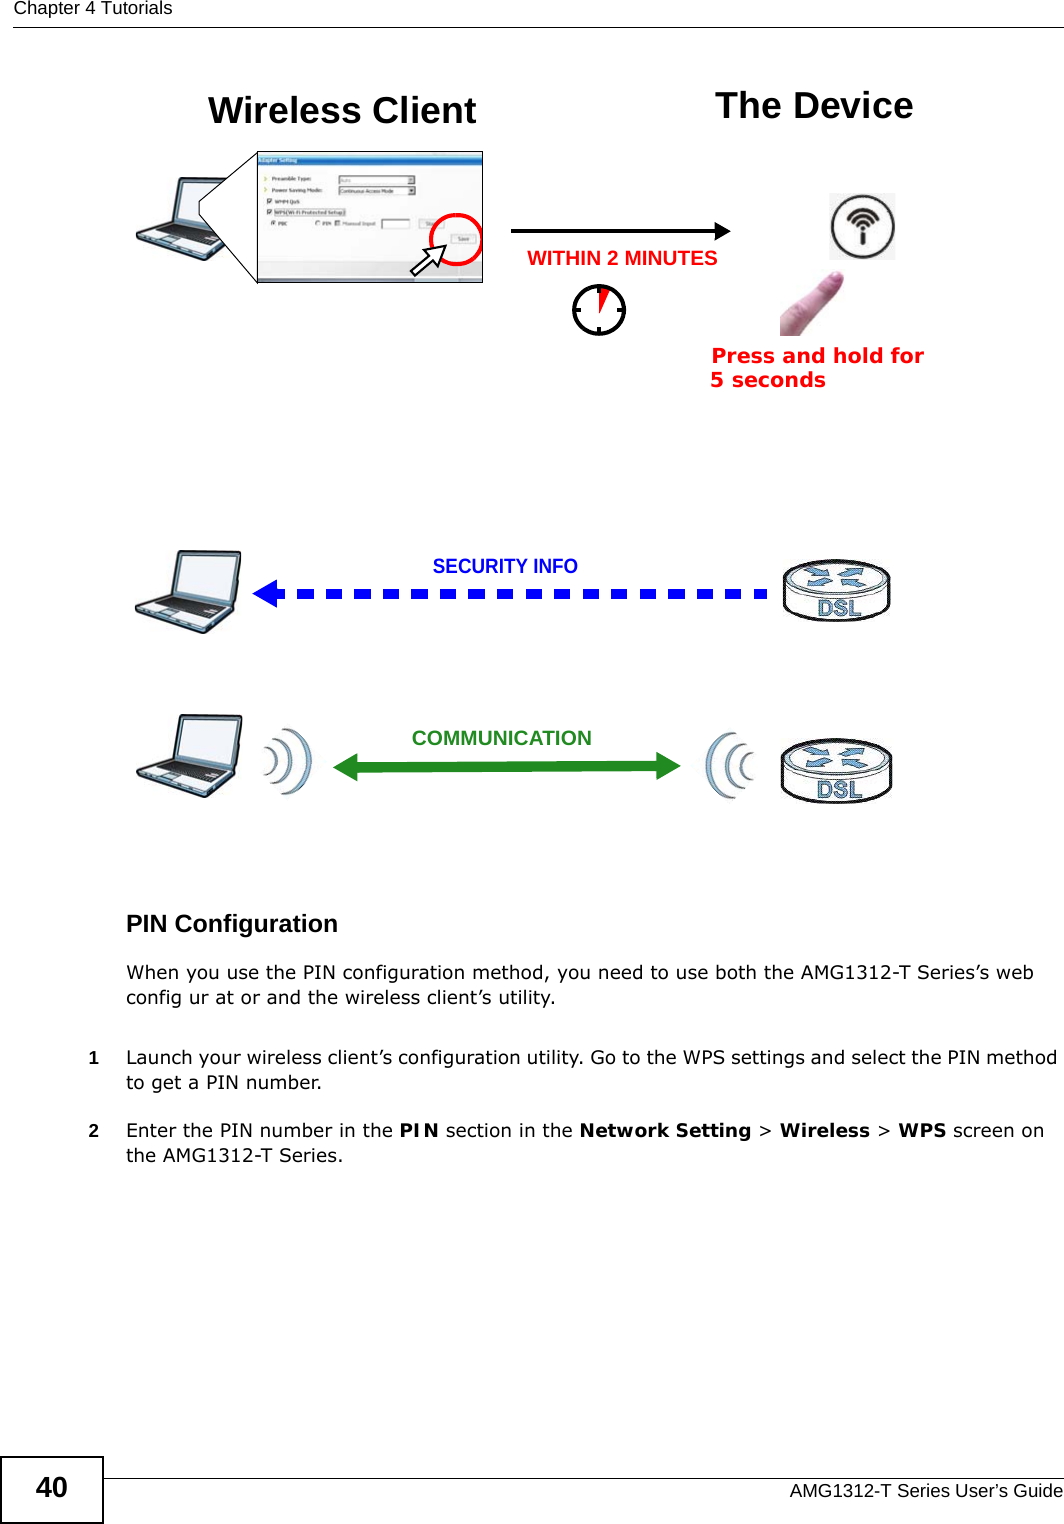 Chapter 4 TutorialsAMG1312-T Series User’s Guide40Example WPS Process: PBC MethodPIN ConfigurationWhen you use the PIN configuration method, you need to use both the AMG1312-T Series’s web config ur at or and the wireless client’s utility.1Launch your wireless client’s configuration utility. Go to the WPS settings and select the PIN method to get a PIN number.   2Enter the PIN number in the PIN section in the Network Setting &gt; Wireless &gt; WPS screen on the AMG1312-T Series. Wireless Client The DeviceSECURITY INFOCOMMUNICATIONWITHIN 2 MINUTESPress and hold for   5 seconds